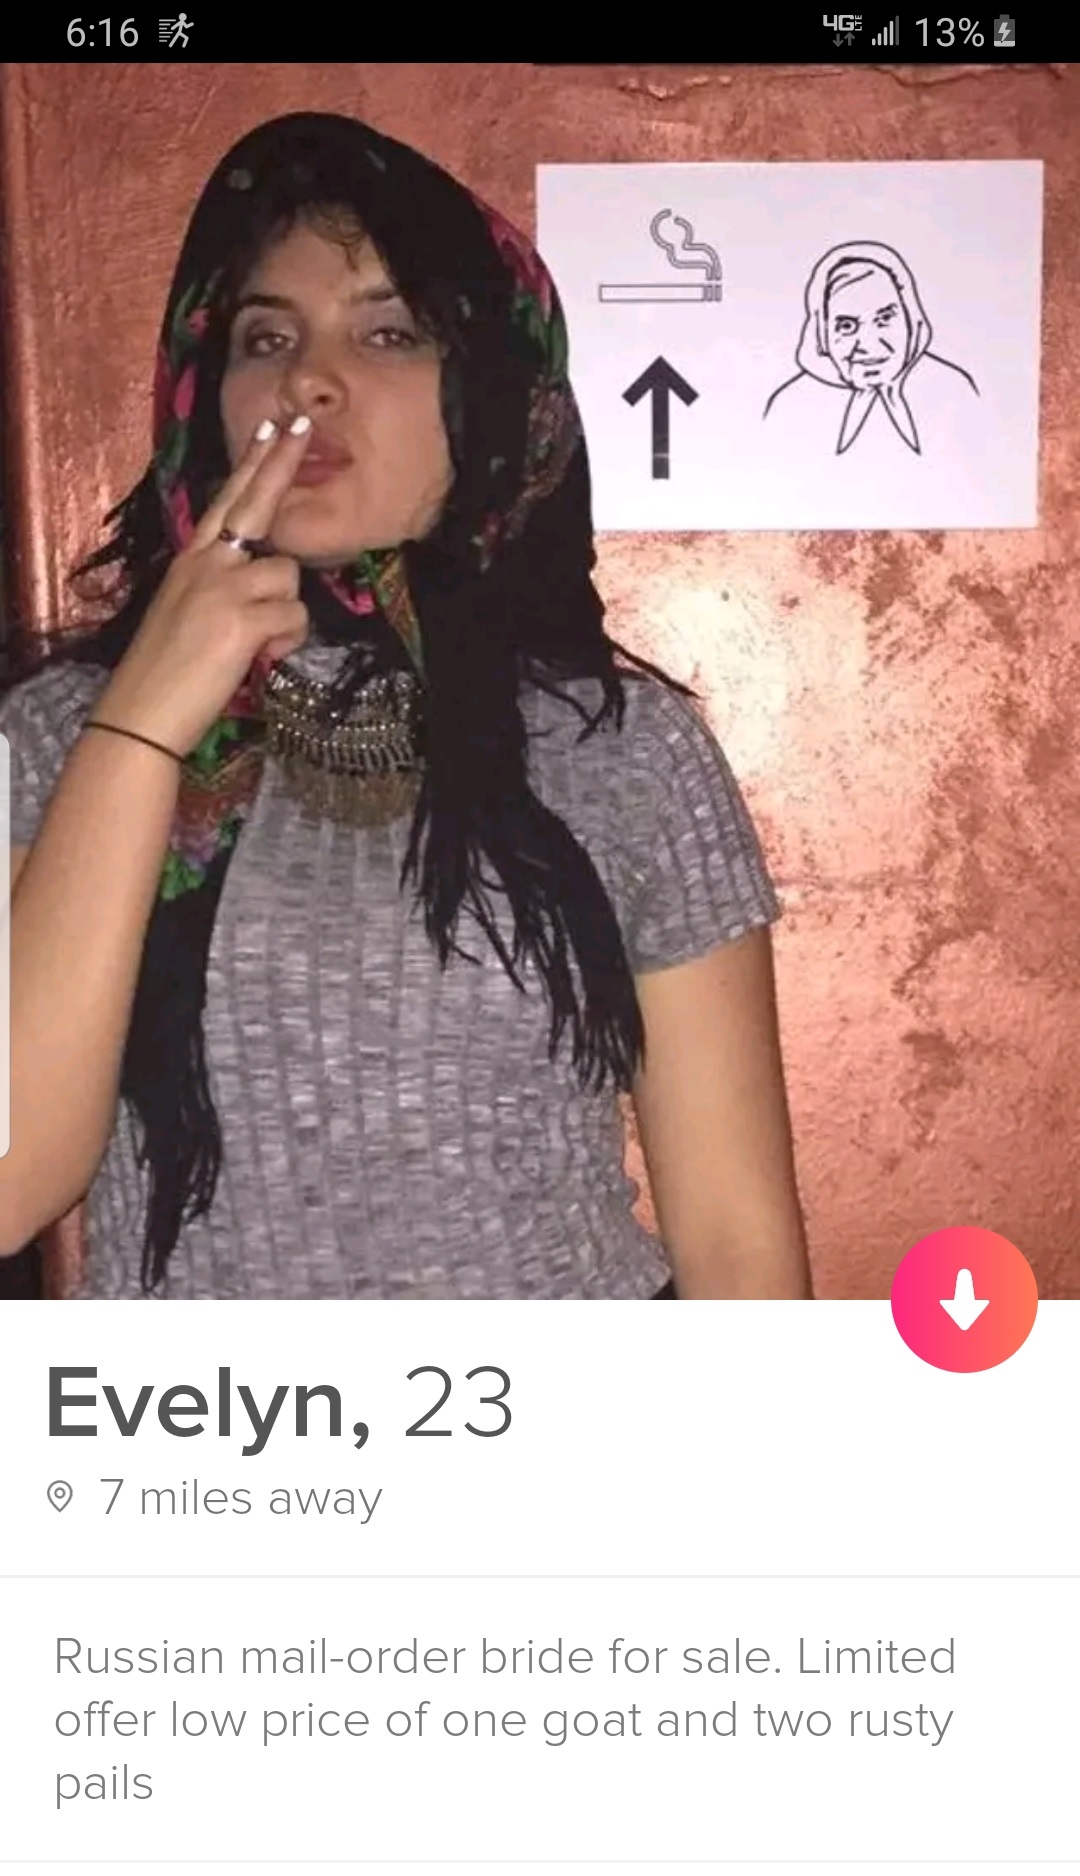 Evelyn, 23 7 miles away Russian mailorder bride for sale. Limited offer low price of one goat and two rusty pails